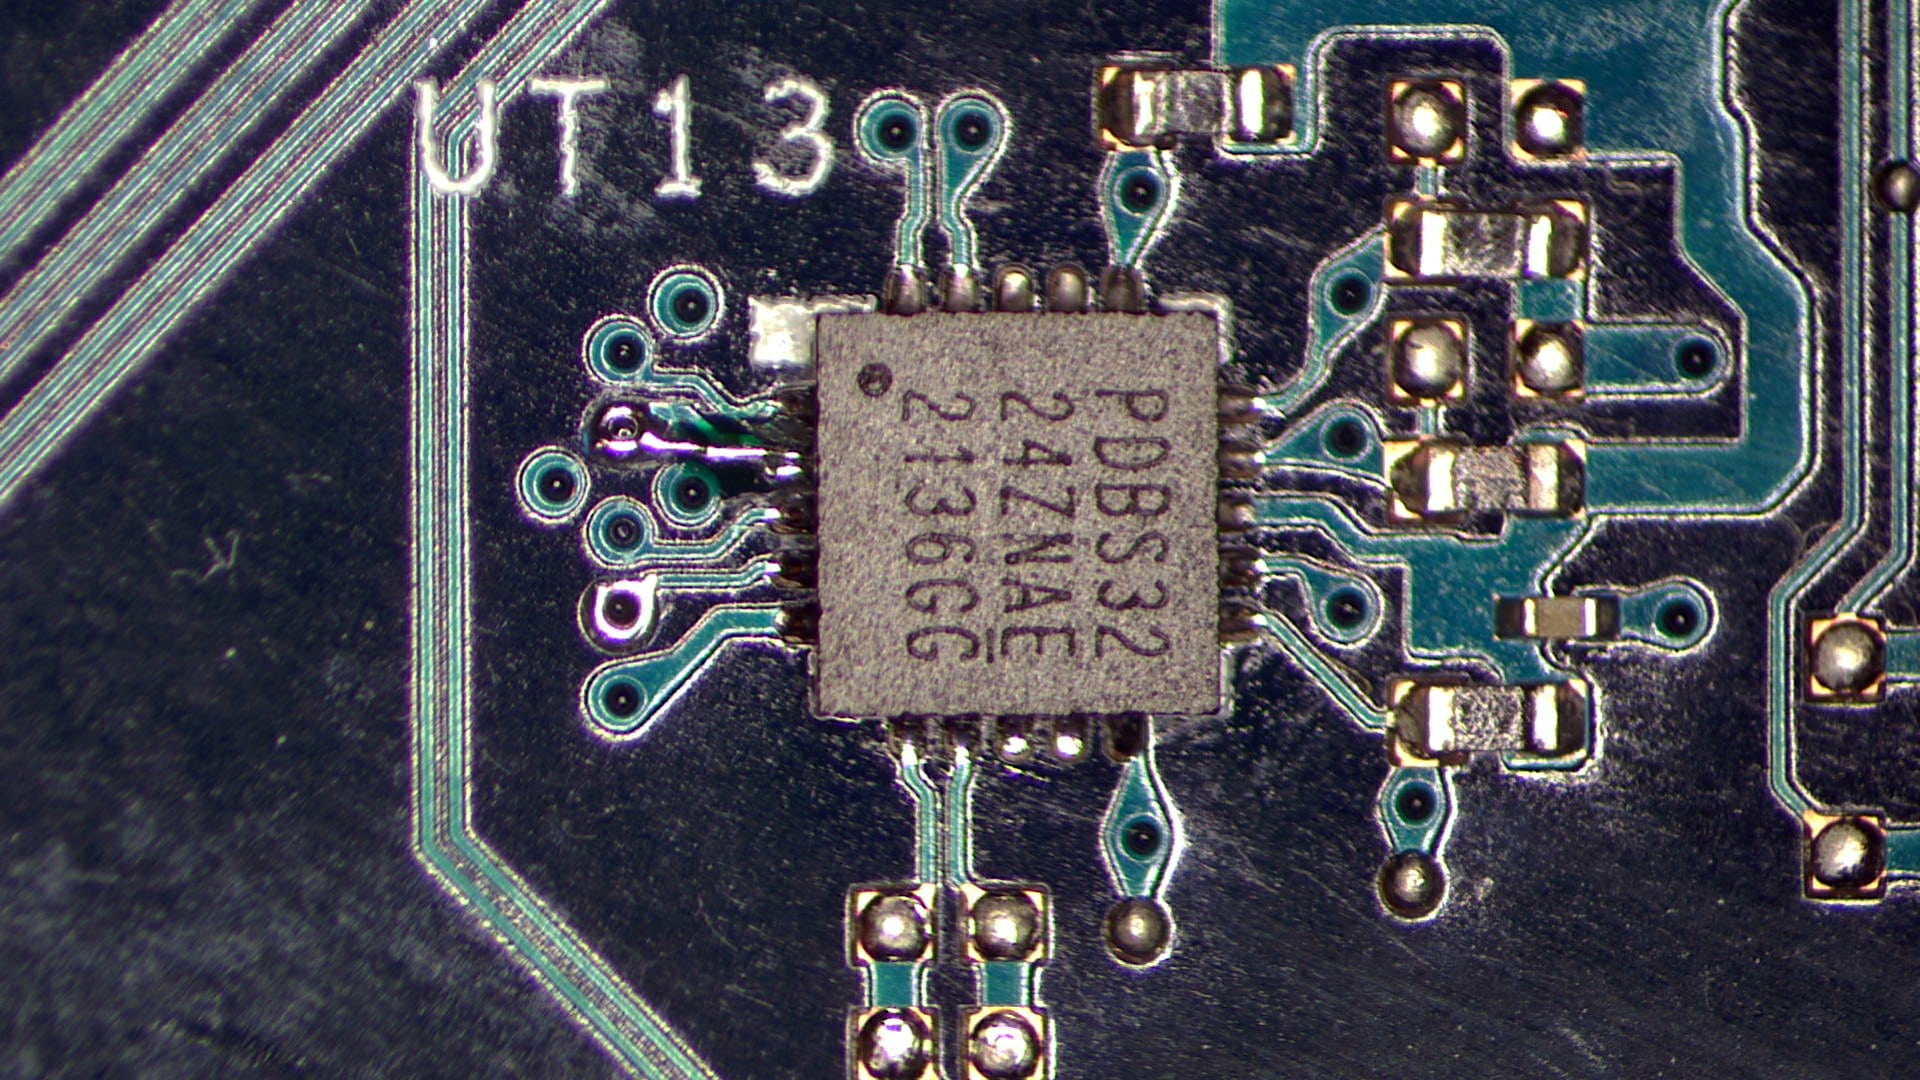 4 new chip soldered